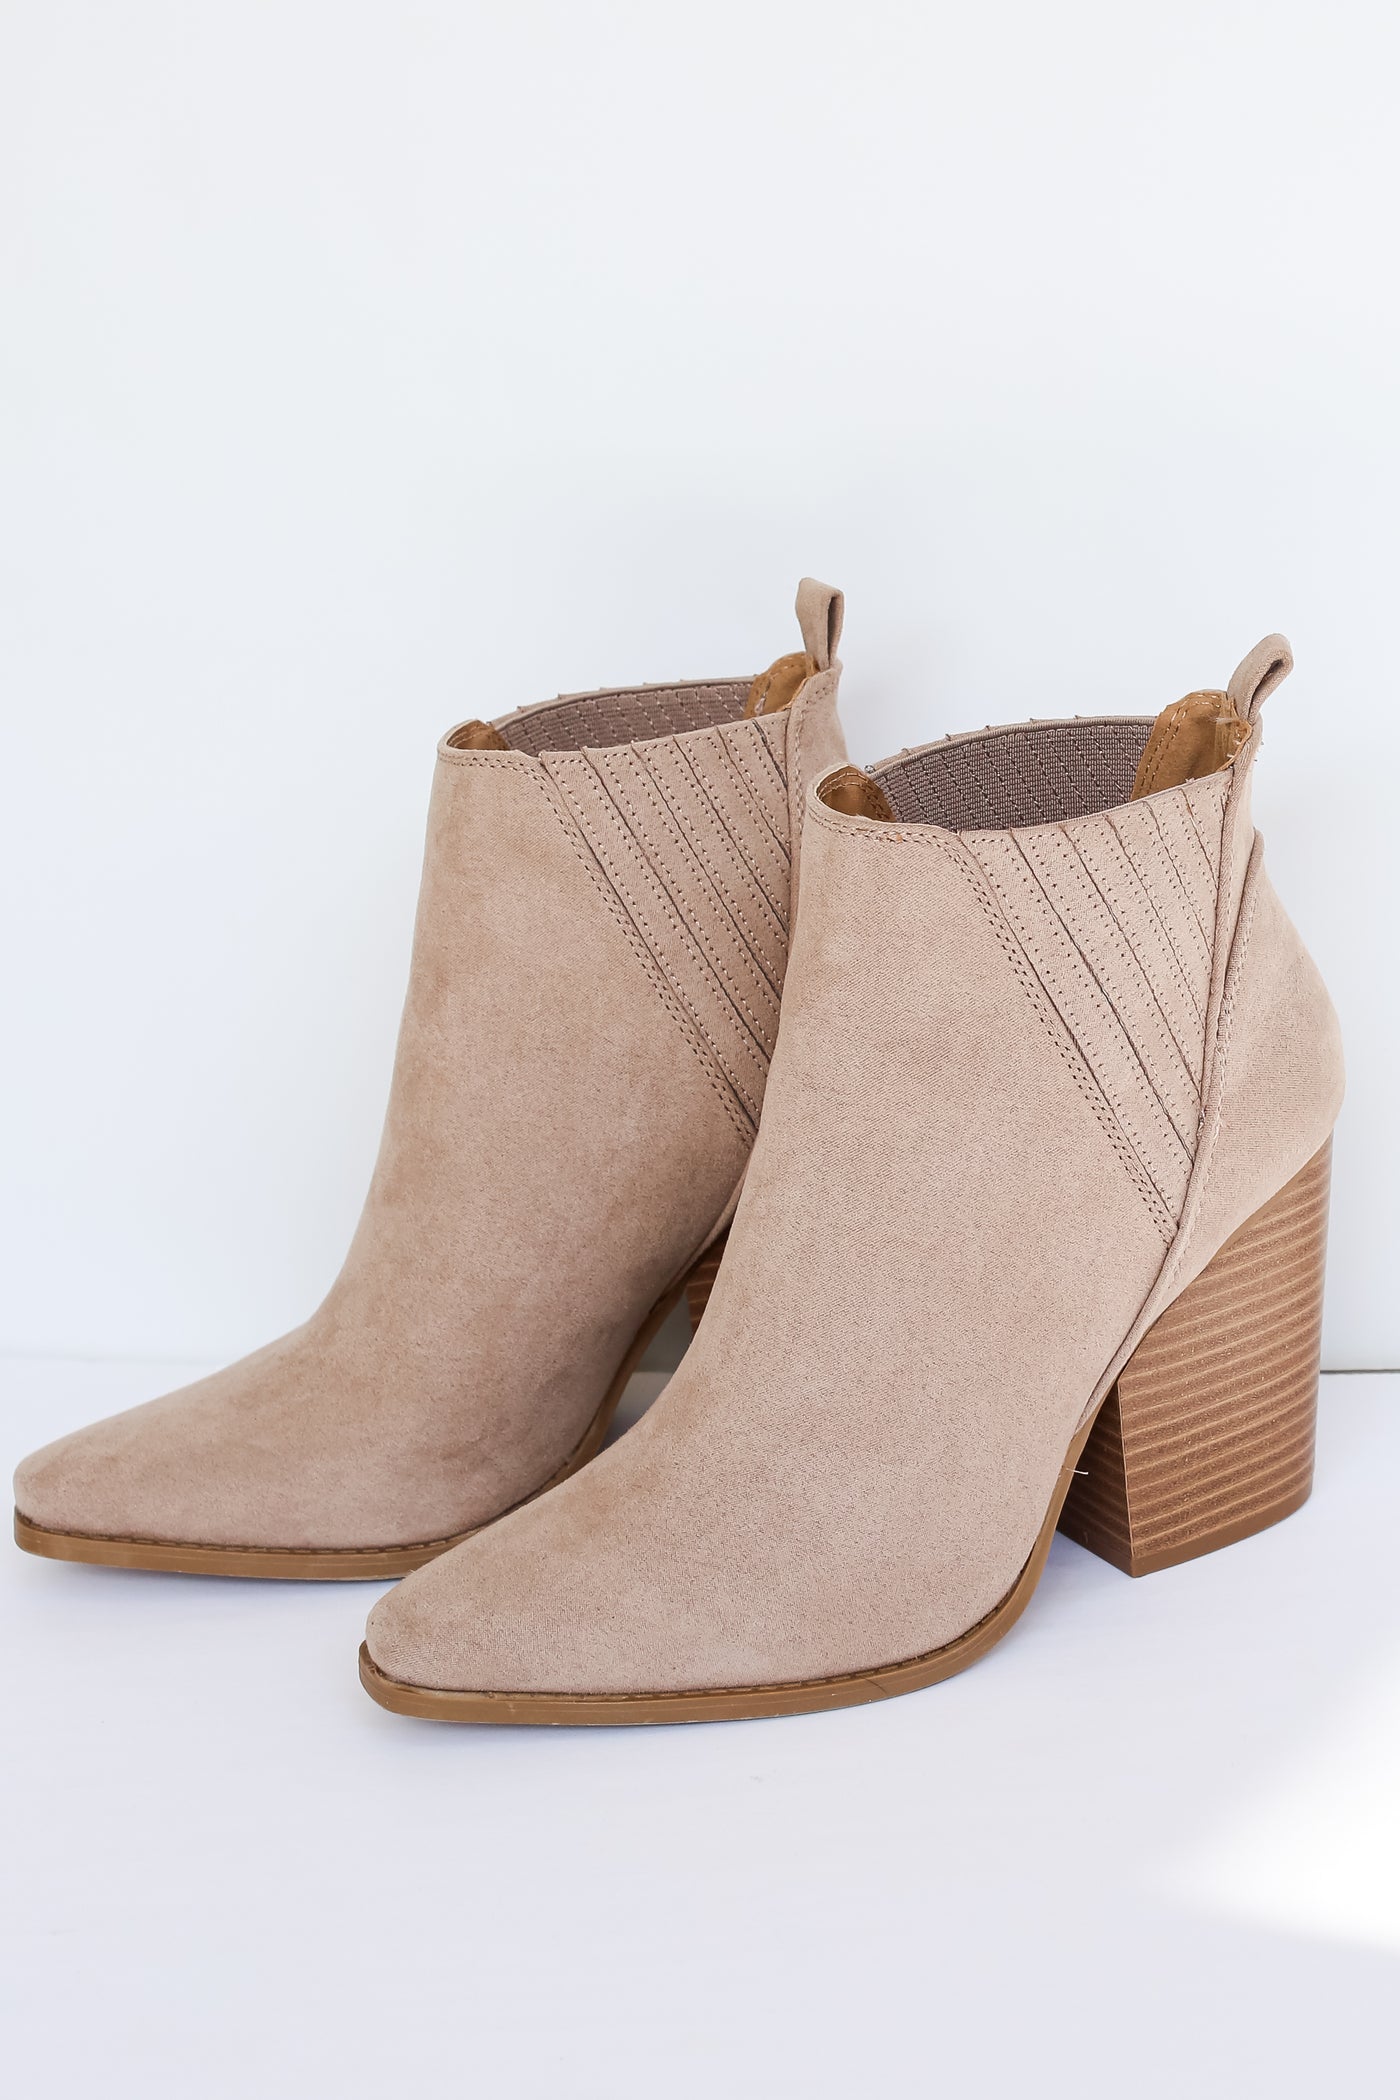 taupe suede Booties side view flat lay